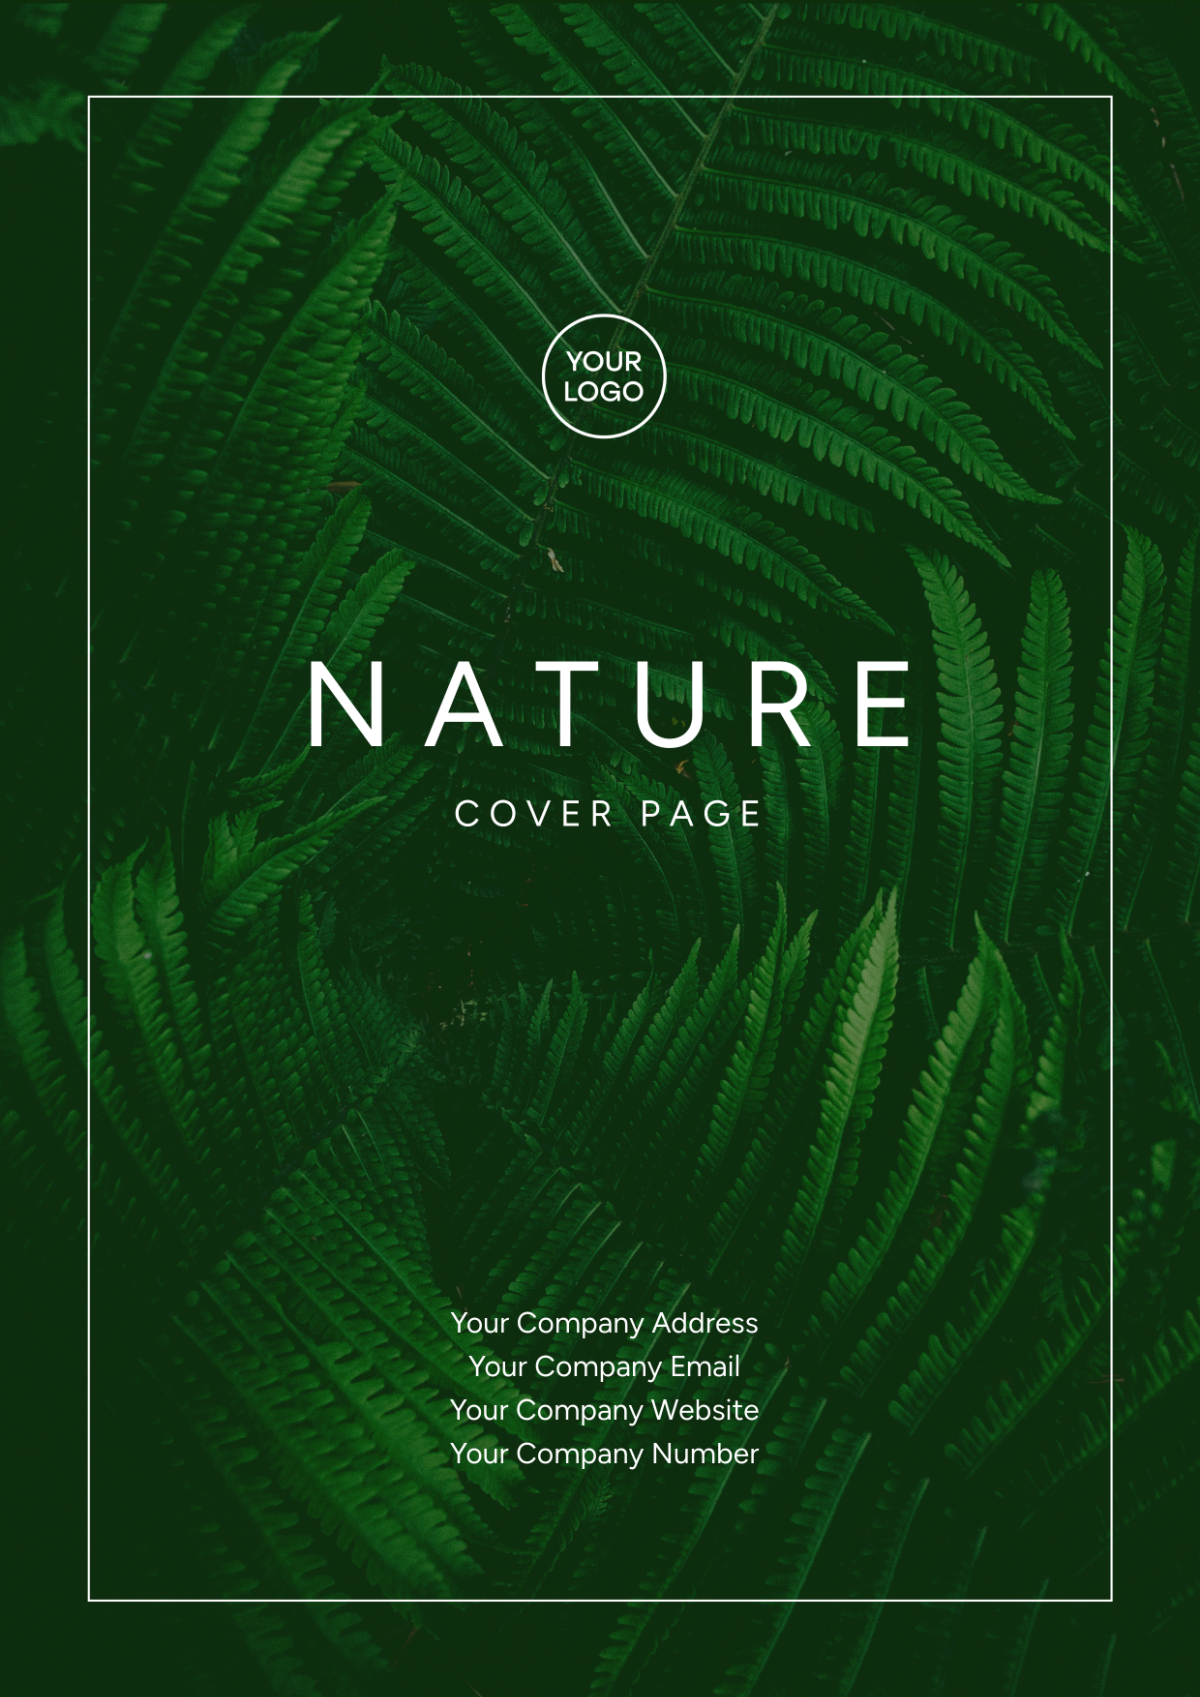 Nature Cover Page Image